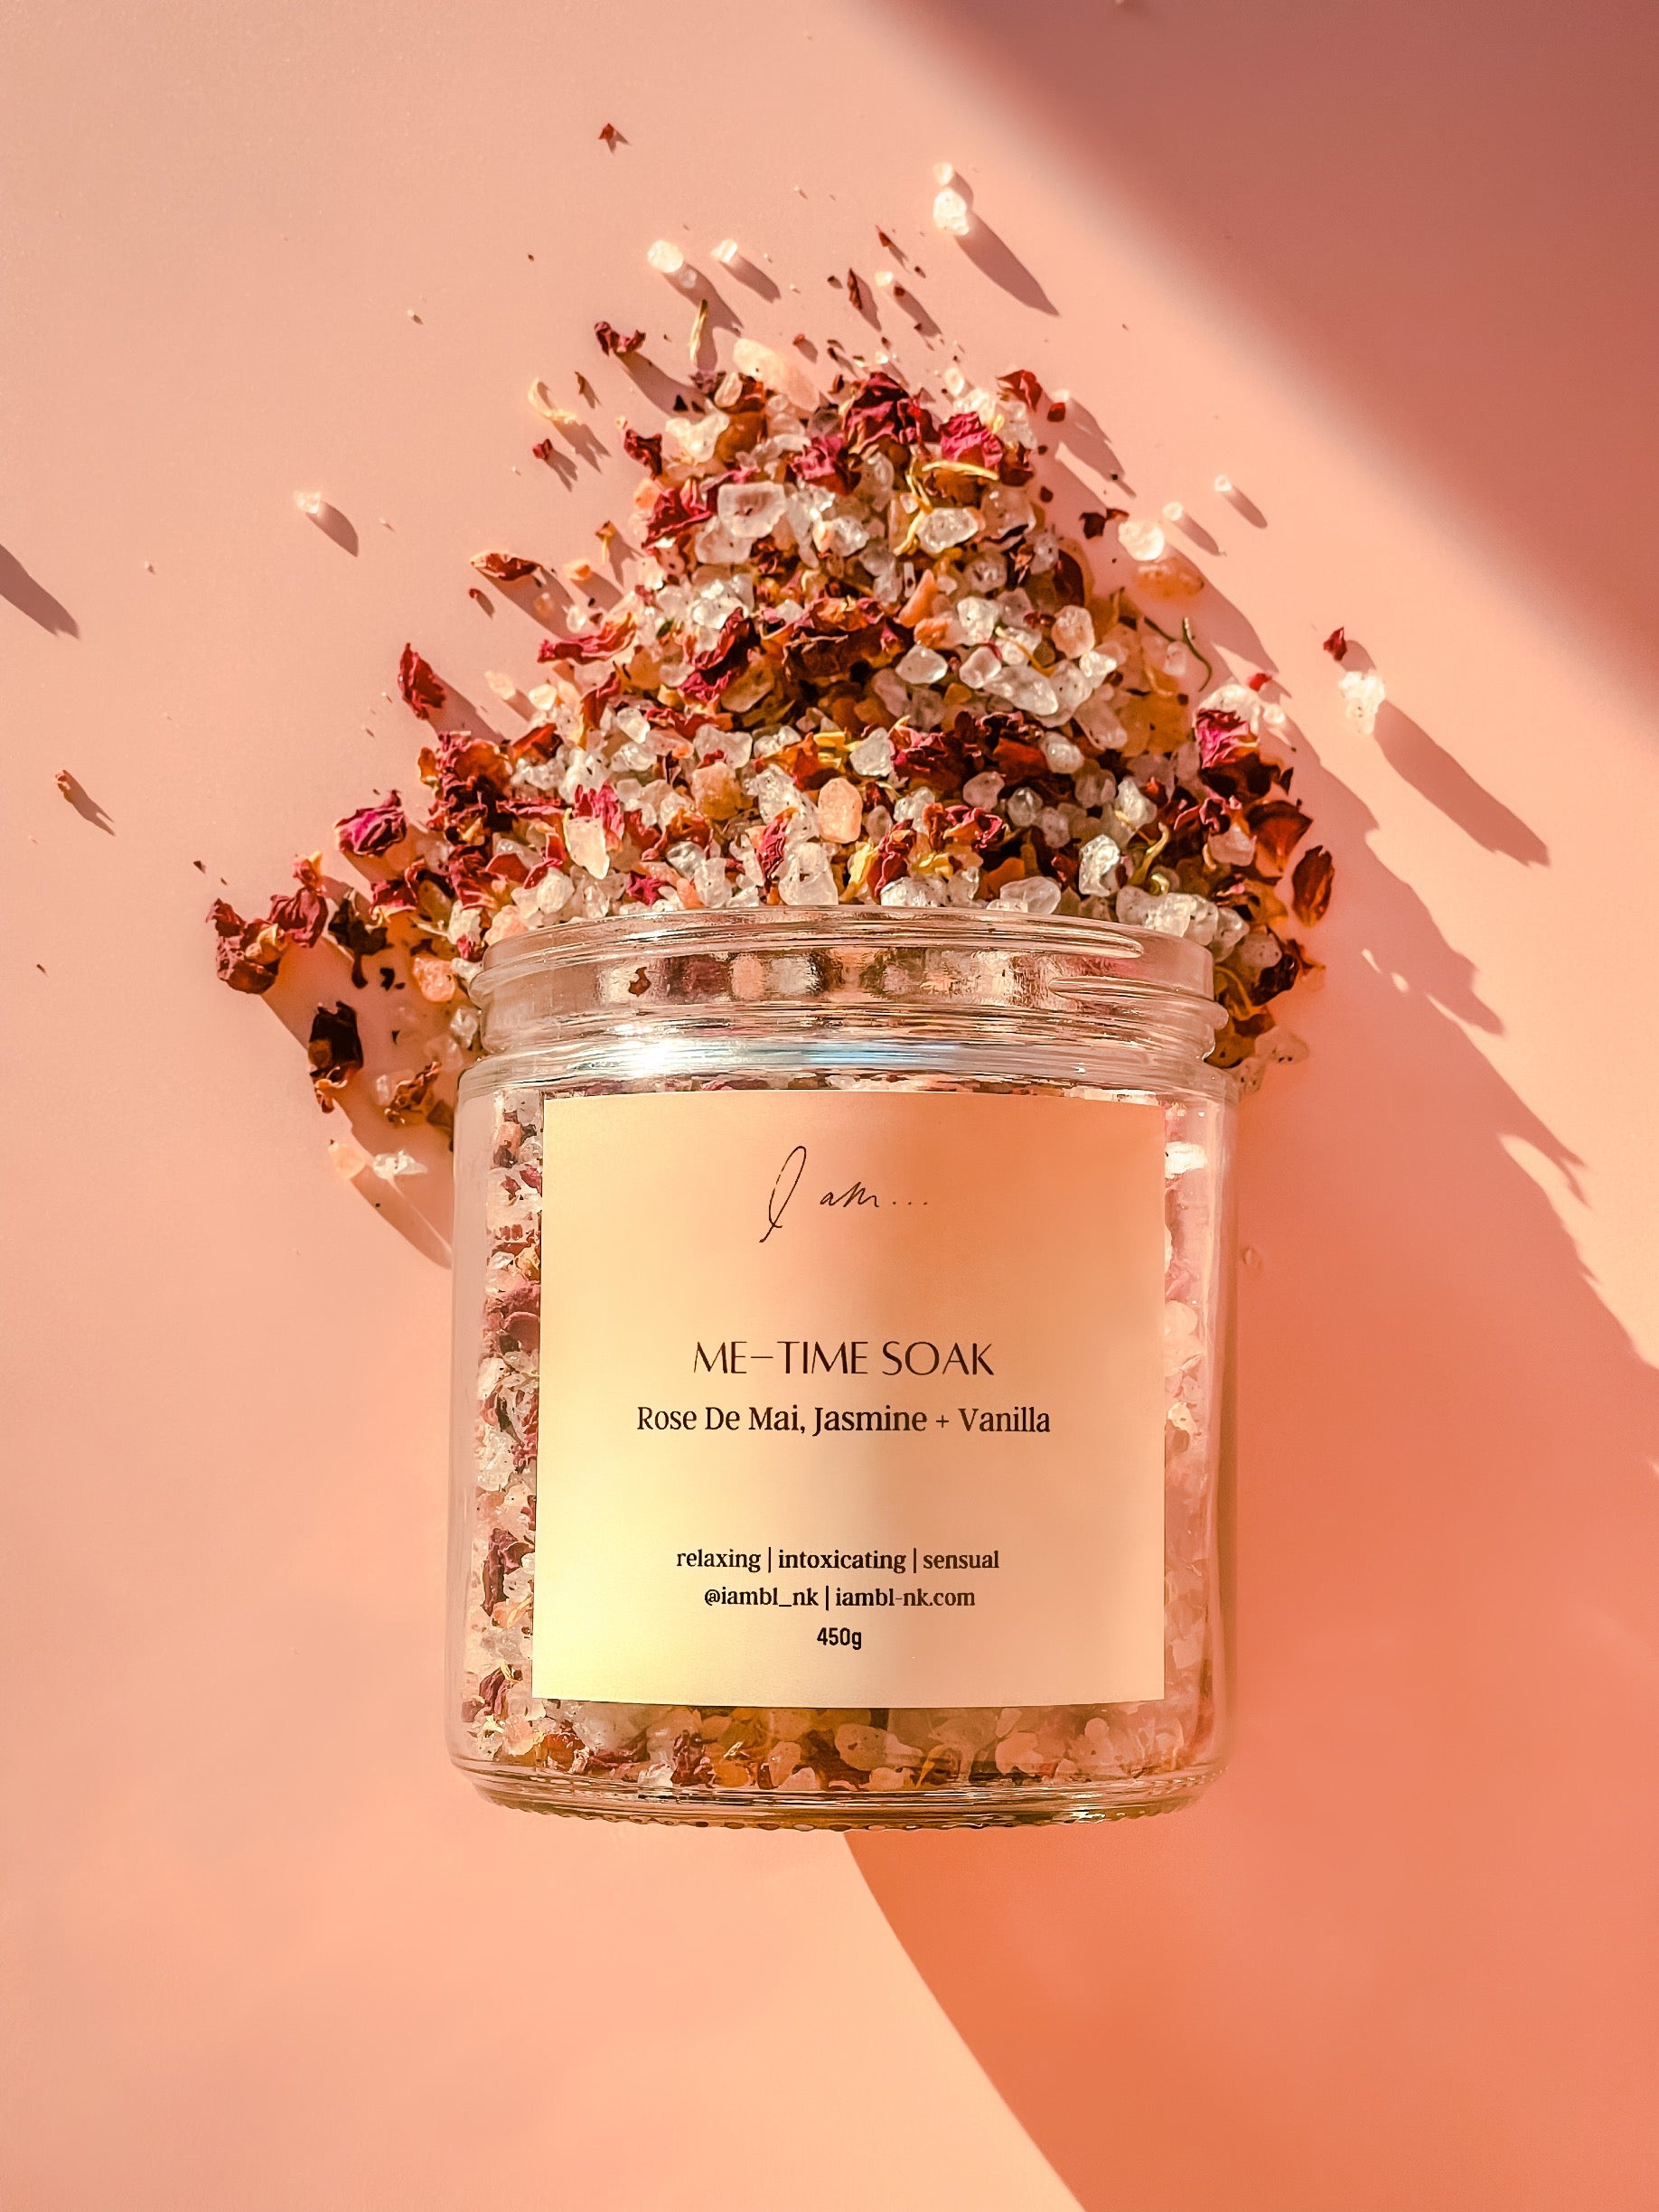 Me-Time Rose de mai soak, photo shows a jar flat lay with soak salts and petals pouring out of the jar